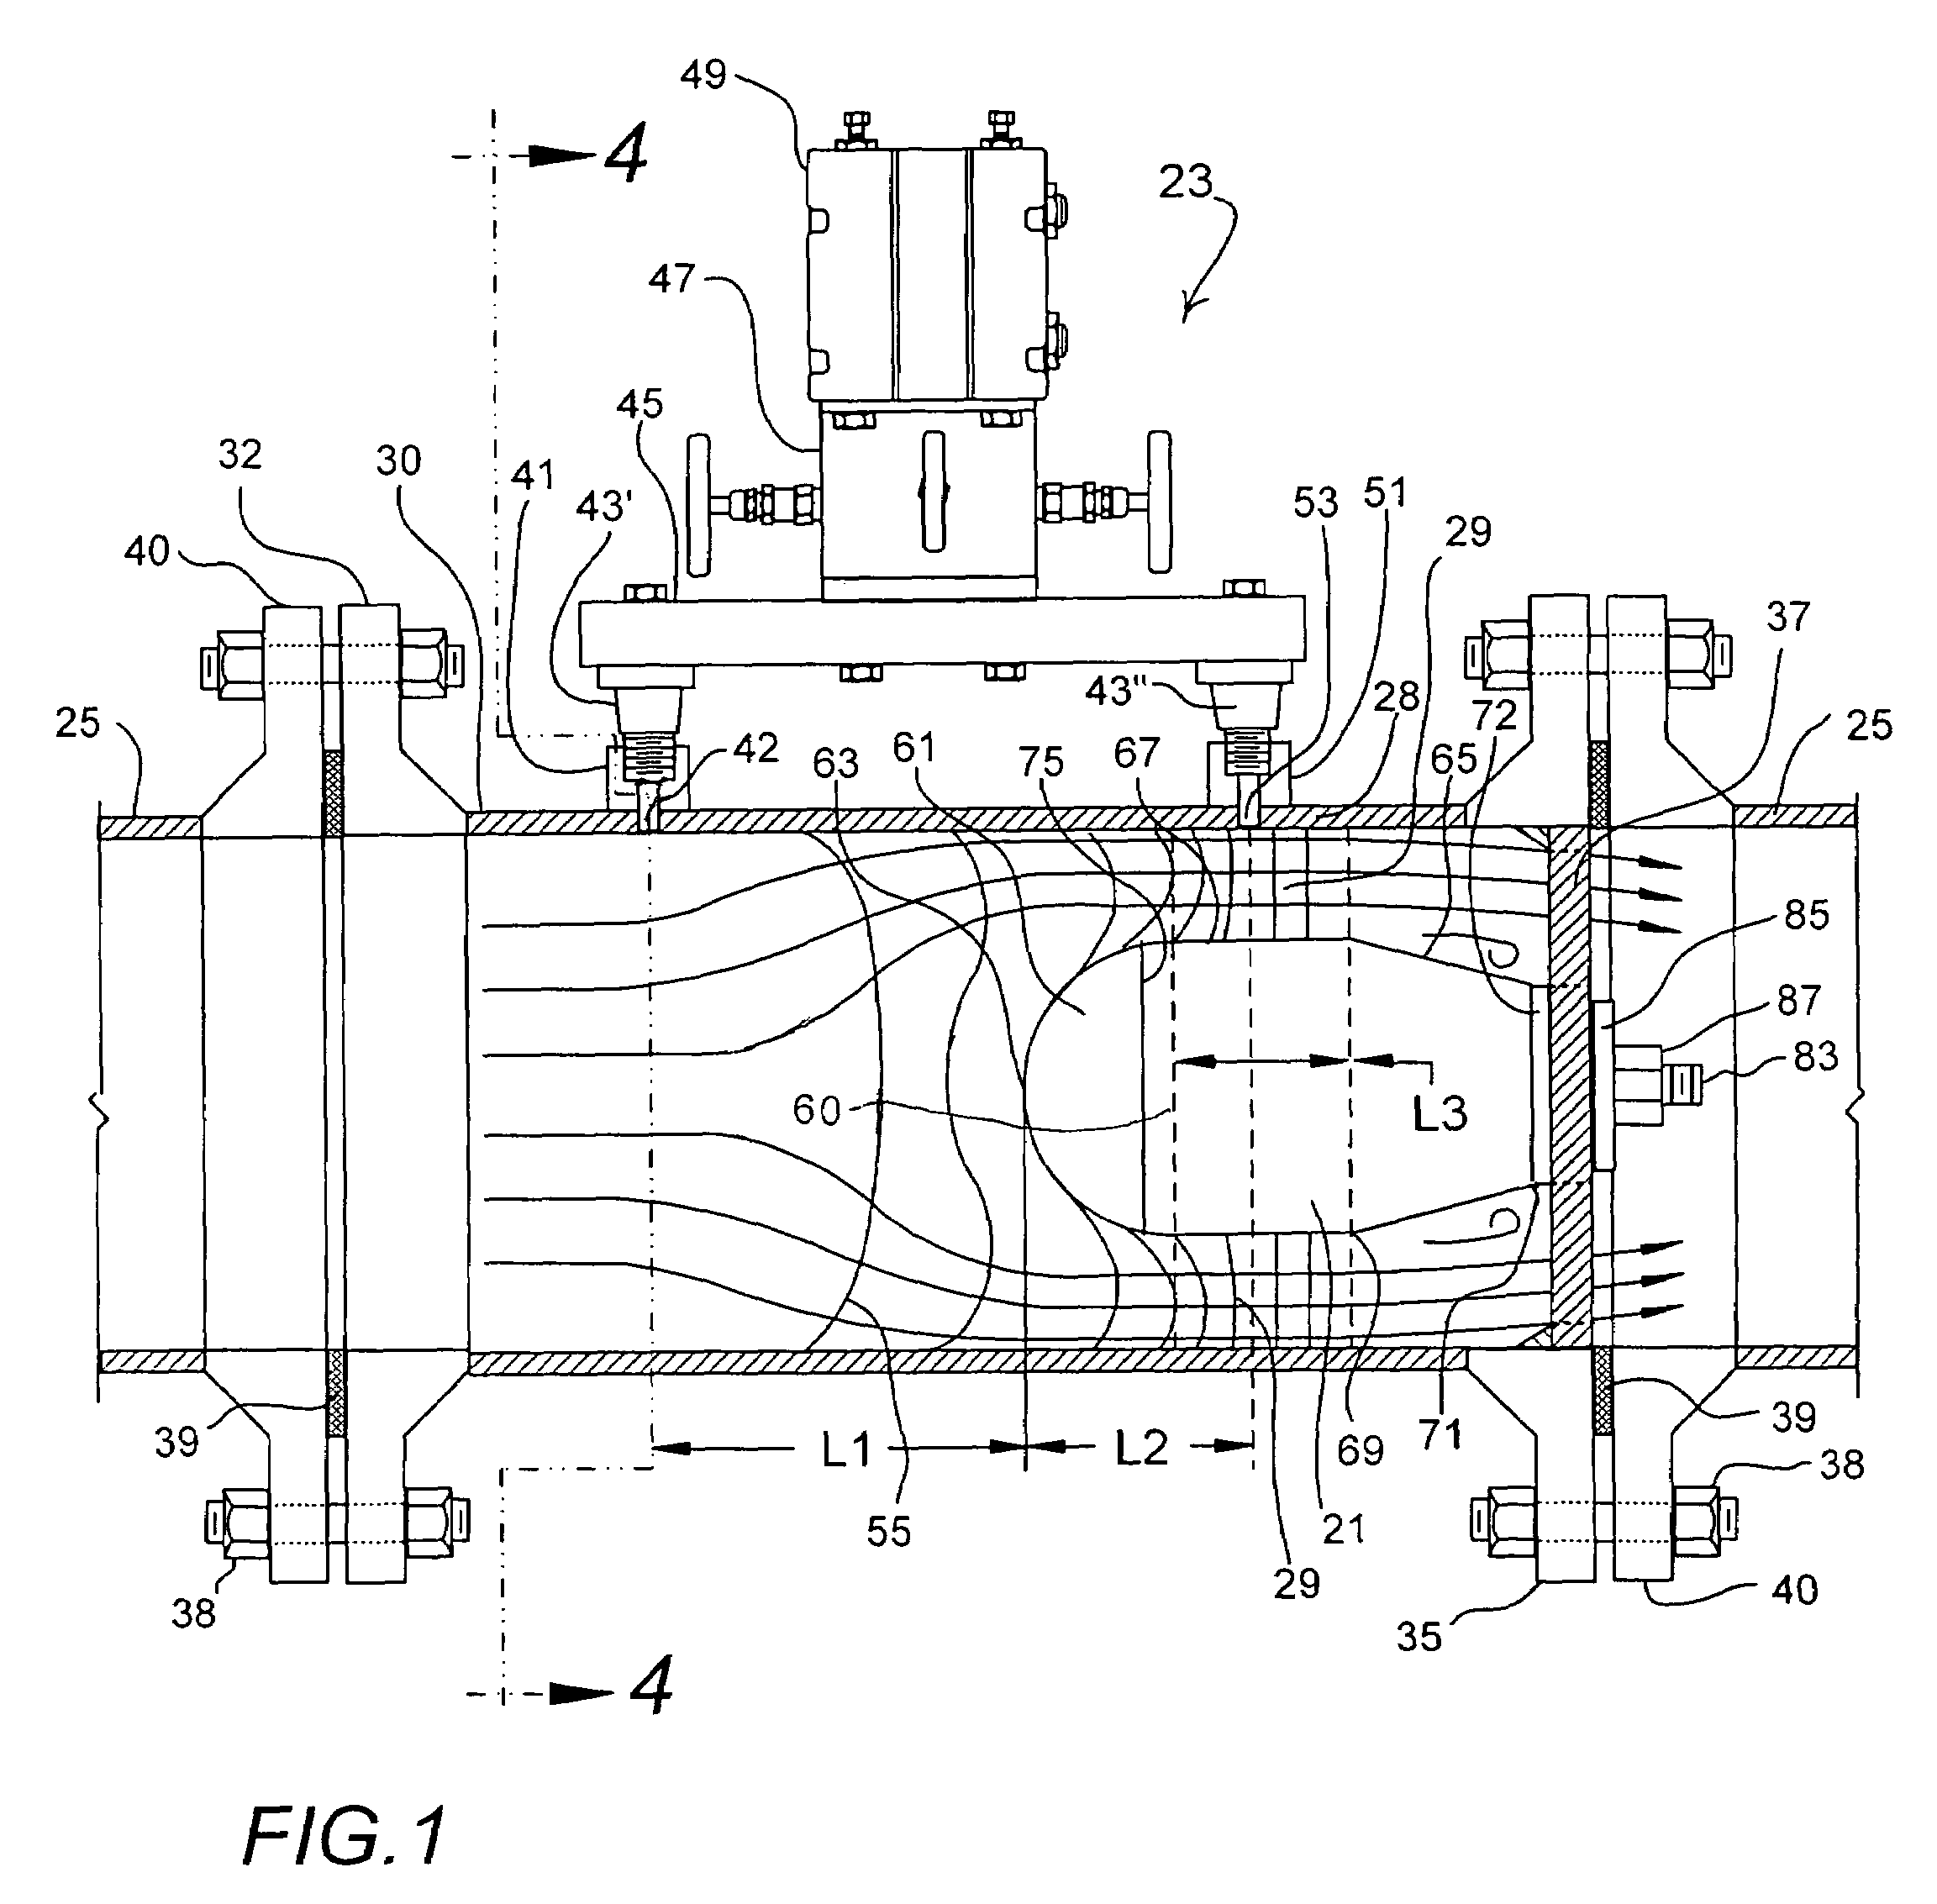 Devices, installations and methods for improved fluid flow measurement in a conduit